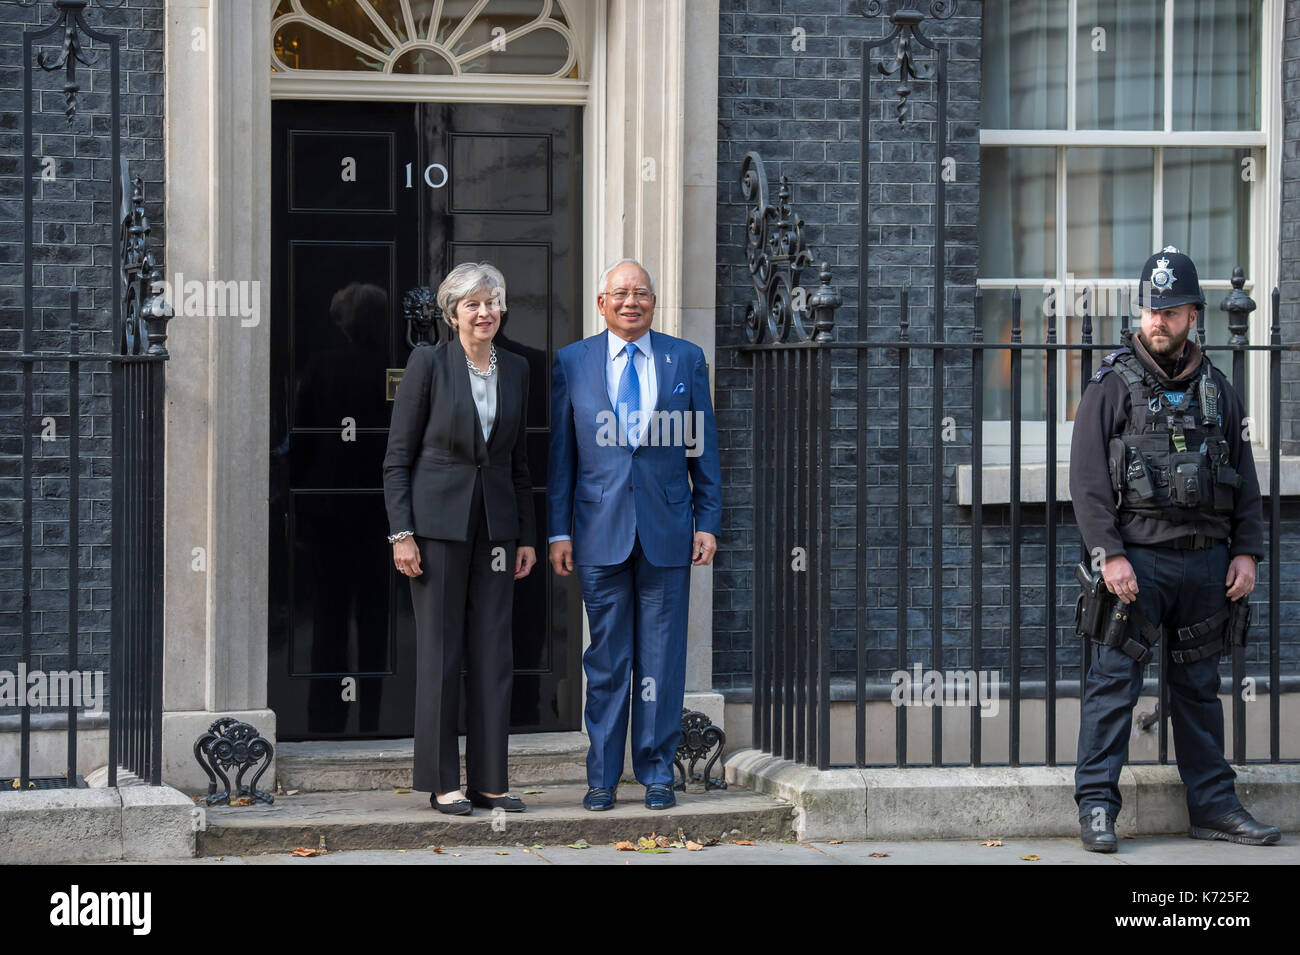 10 Downing Street, London UK. 14 September, 2017. The Prime Minister of Malaysia, Najib Razak, is welcomed to 10 Downing Street by British PM Theresa May. Credit: Malcolm Park/Alamy Live News. Stock Photo